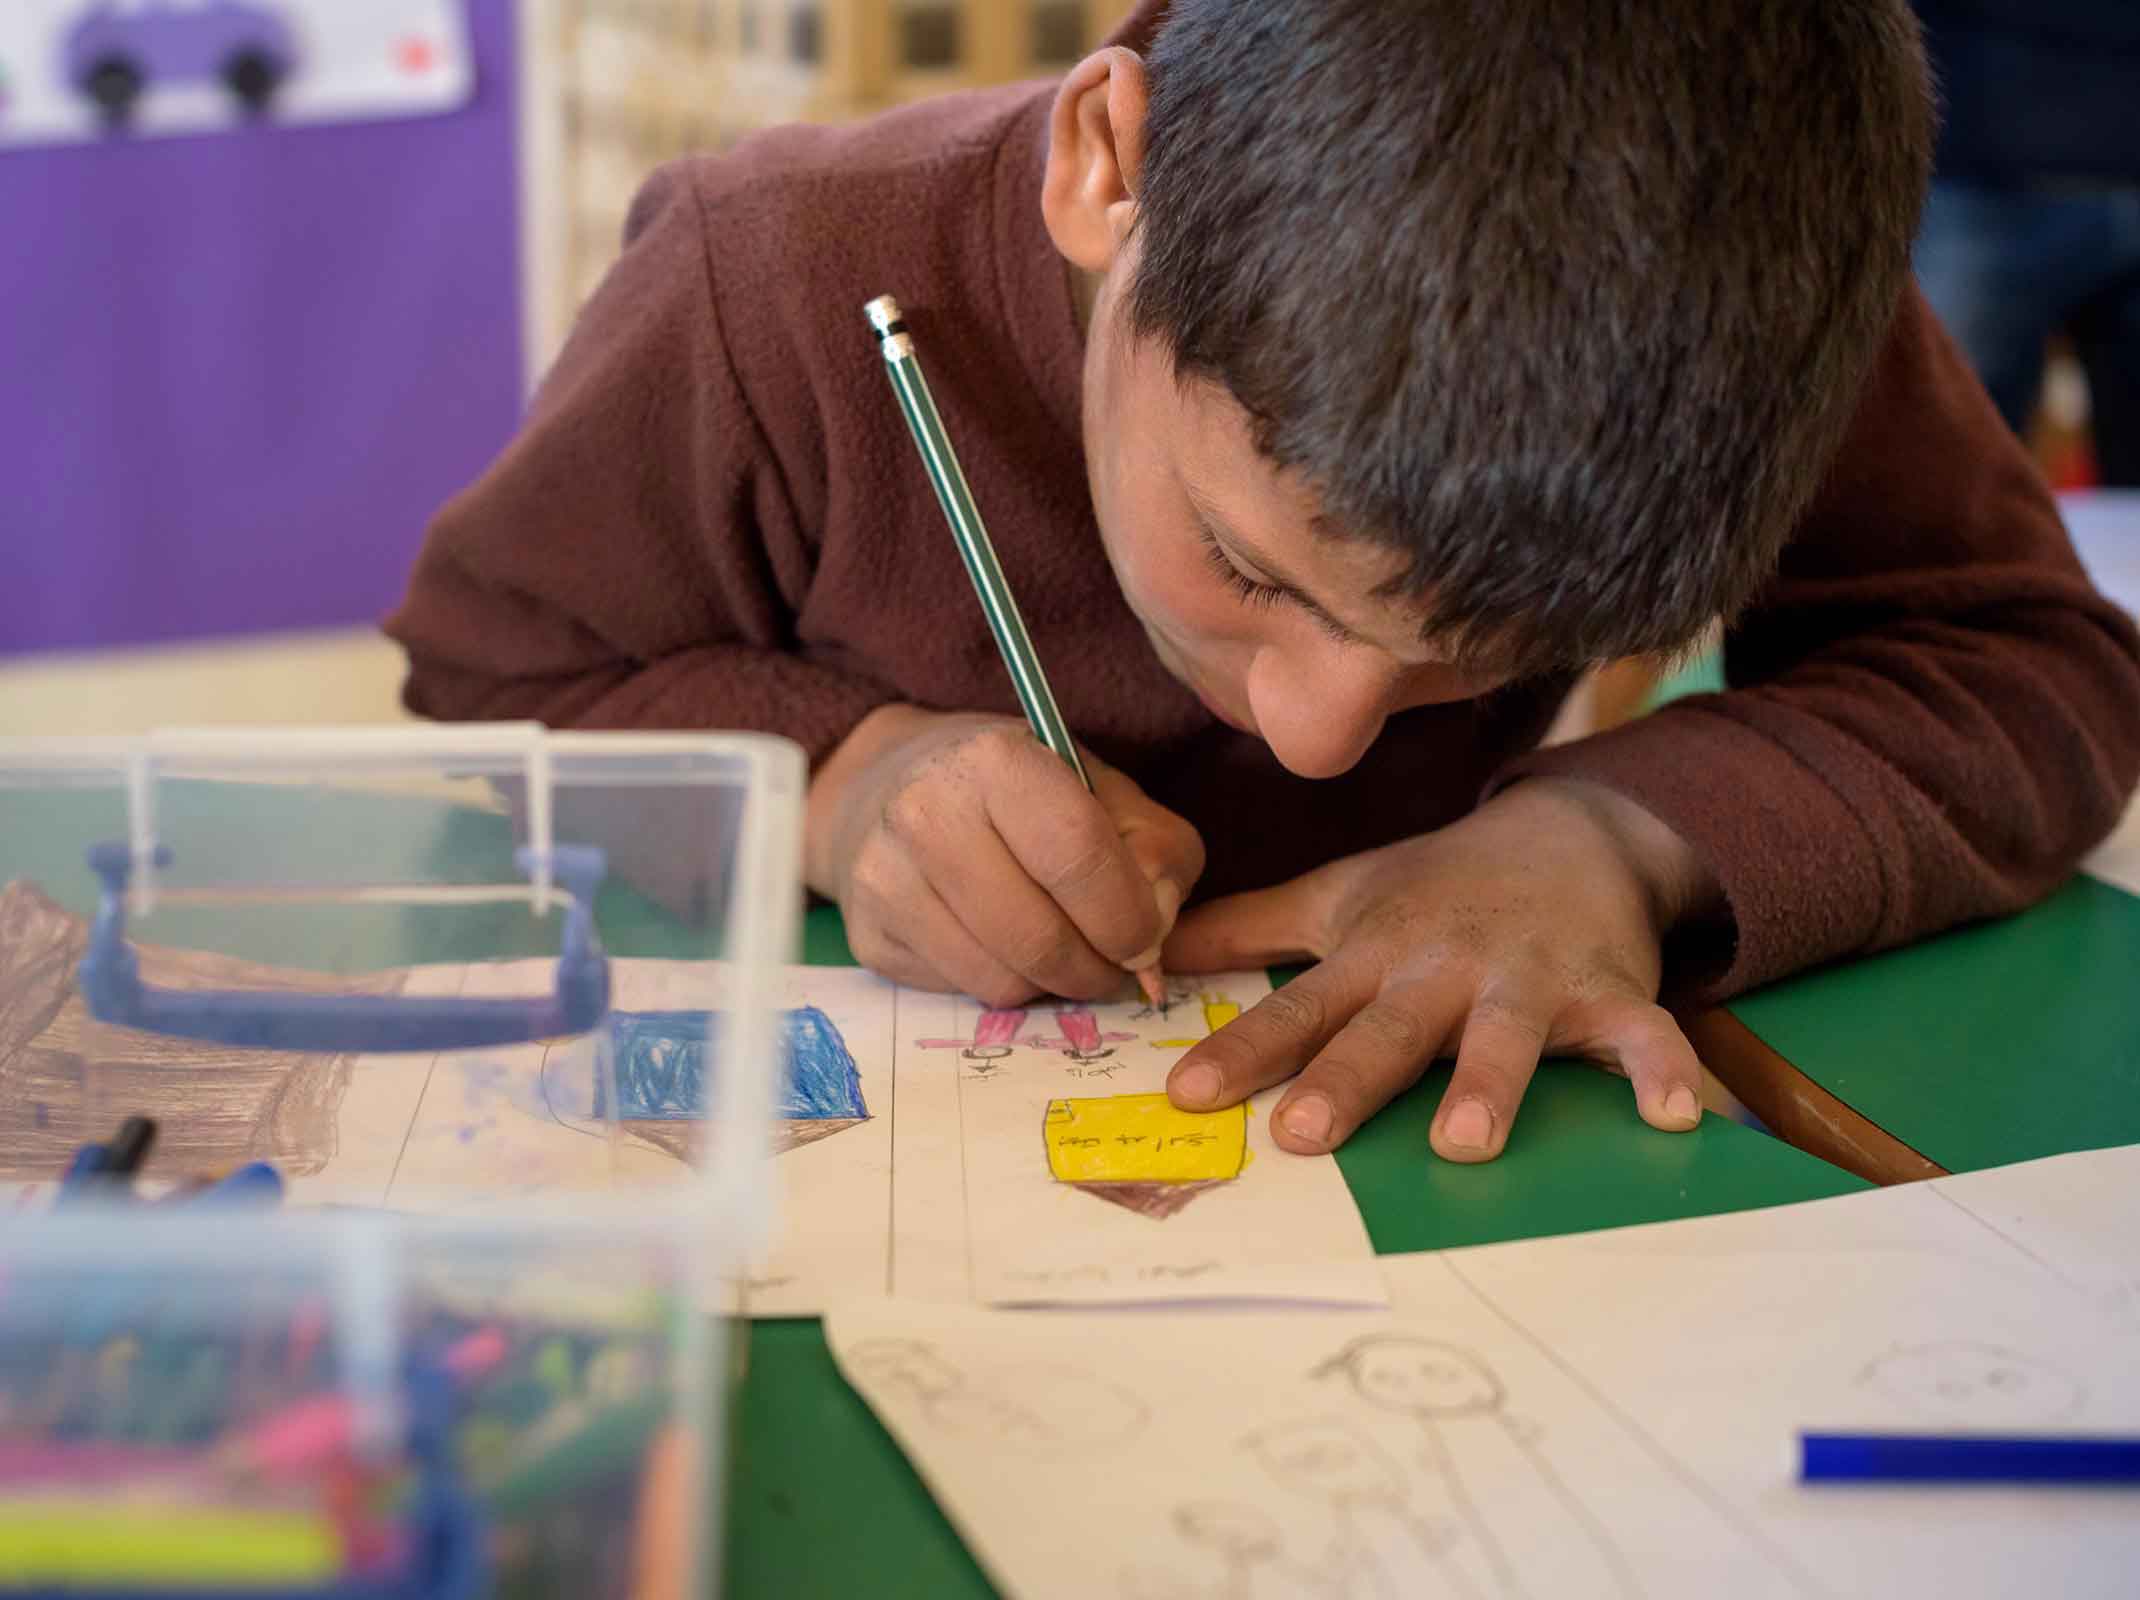 Syrian refugee children use art to express their feelings.